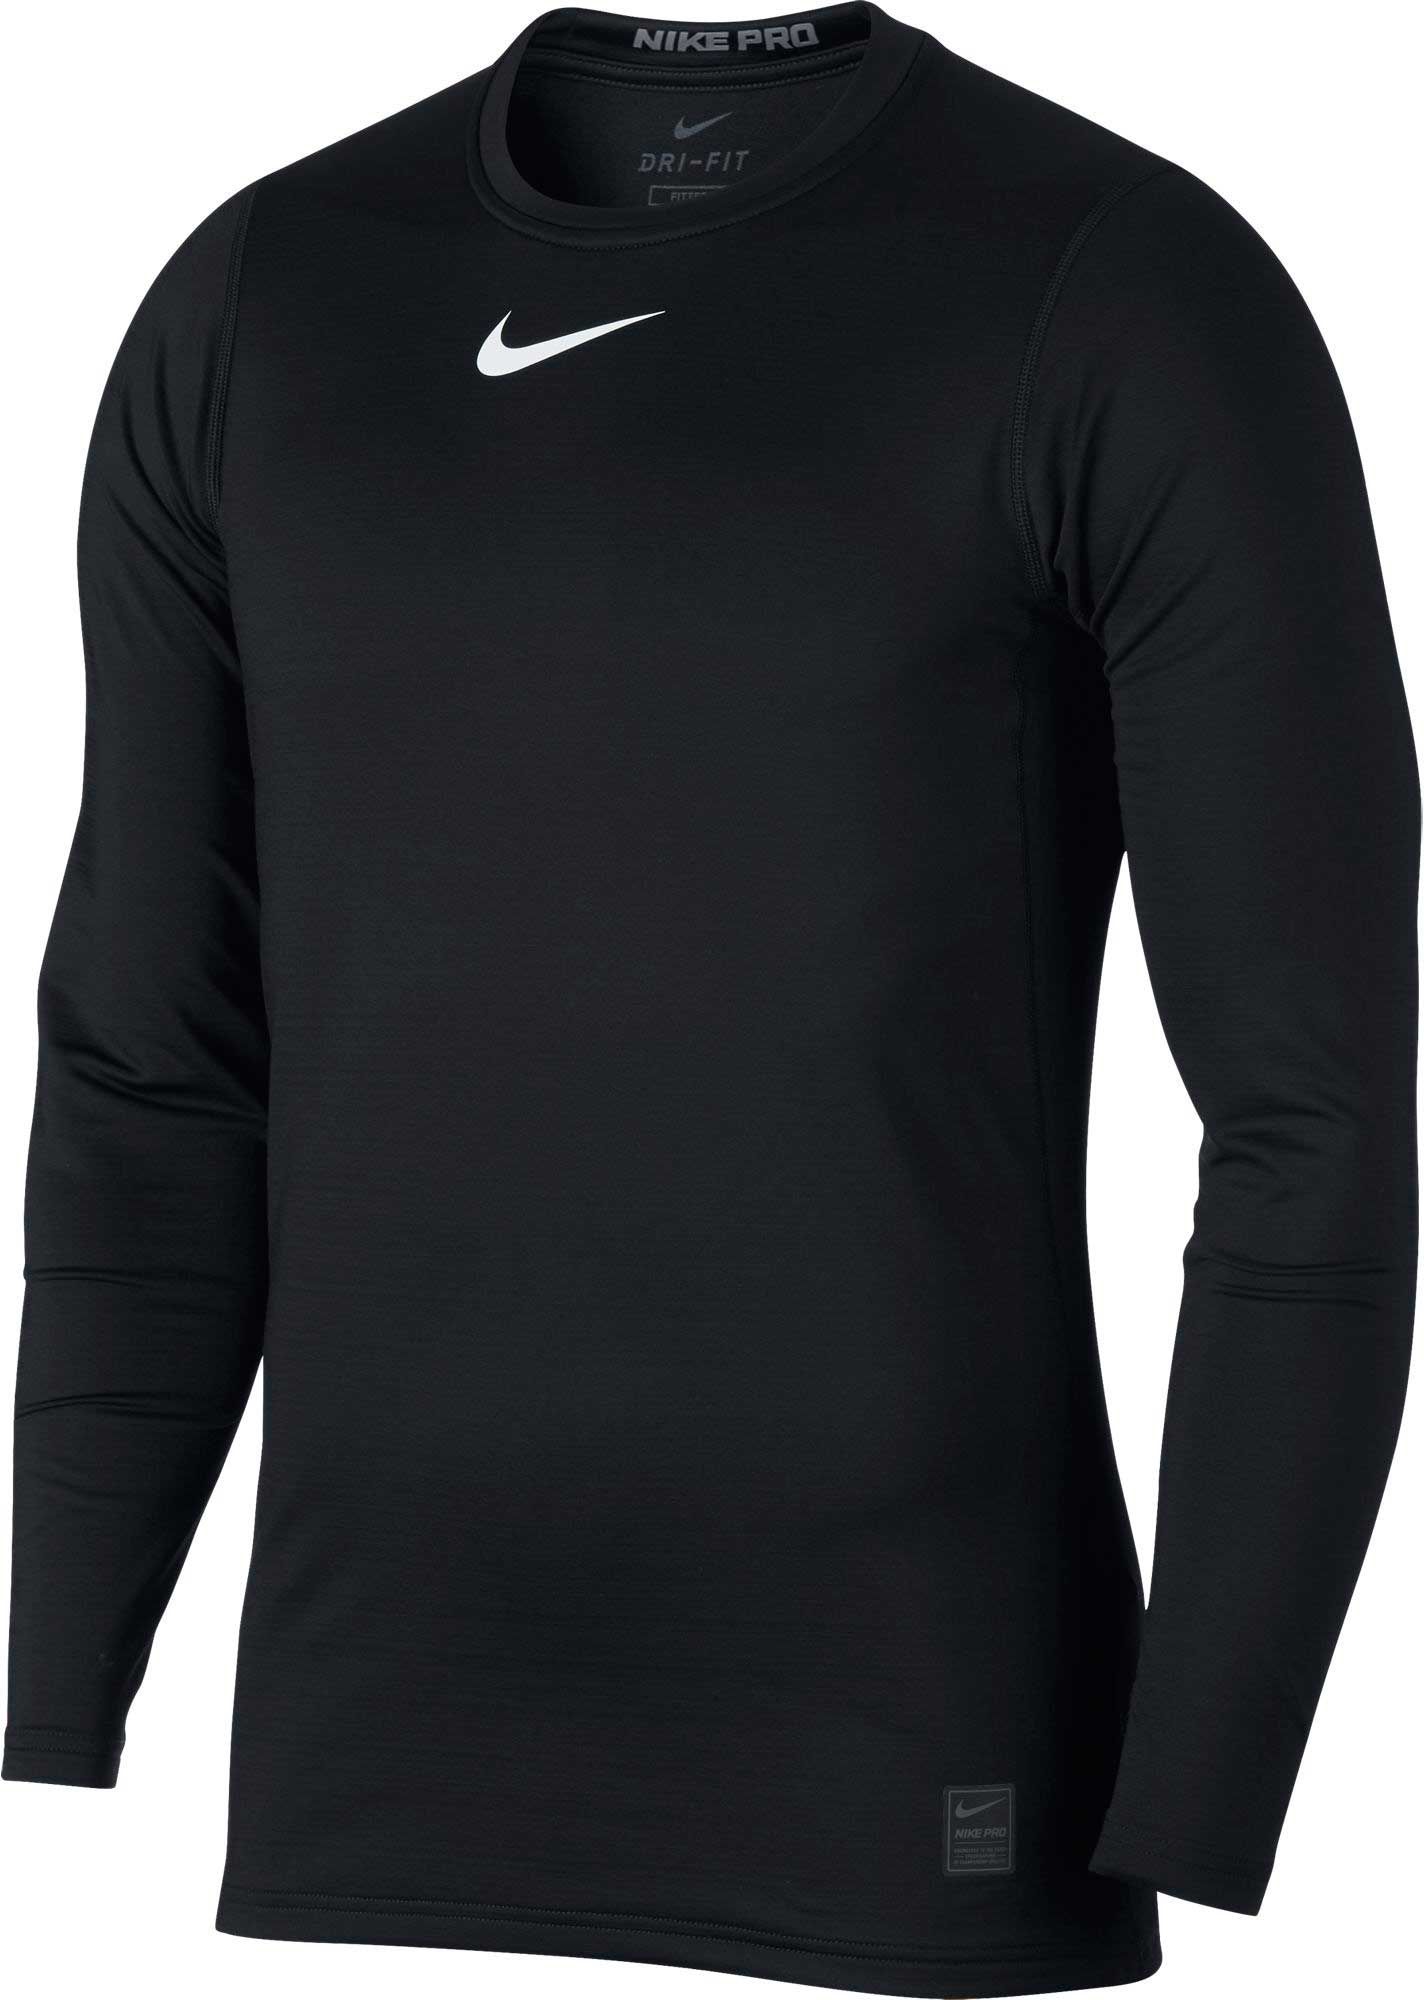 Men's Compression Shirts & Tops | DICK'S Sporting Goods